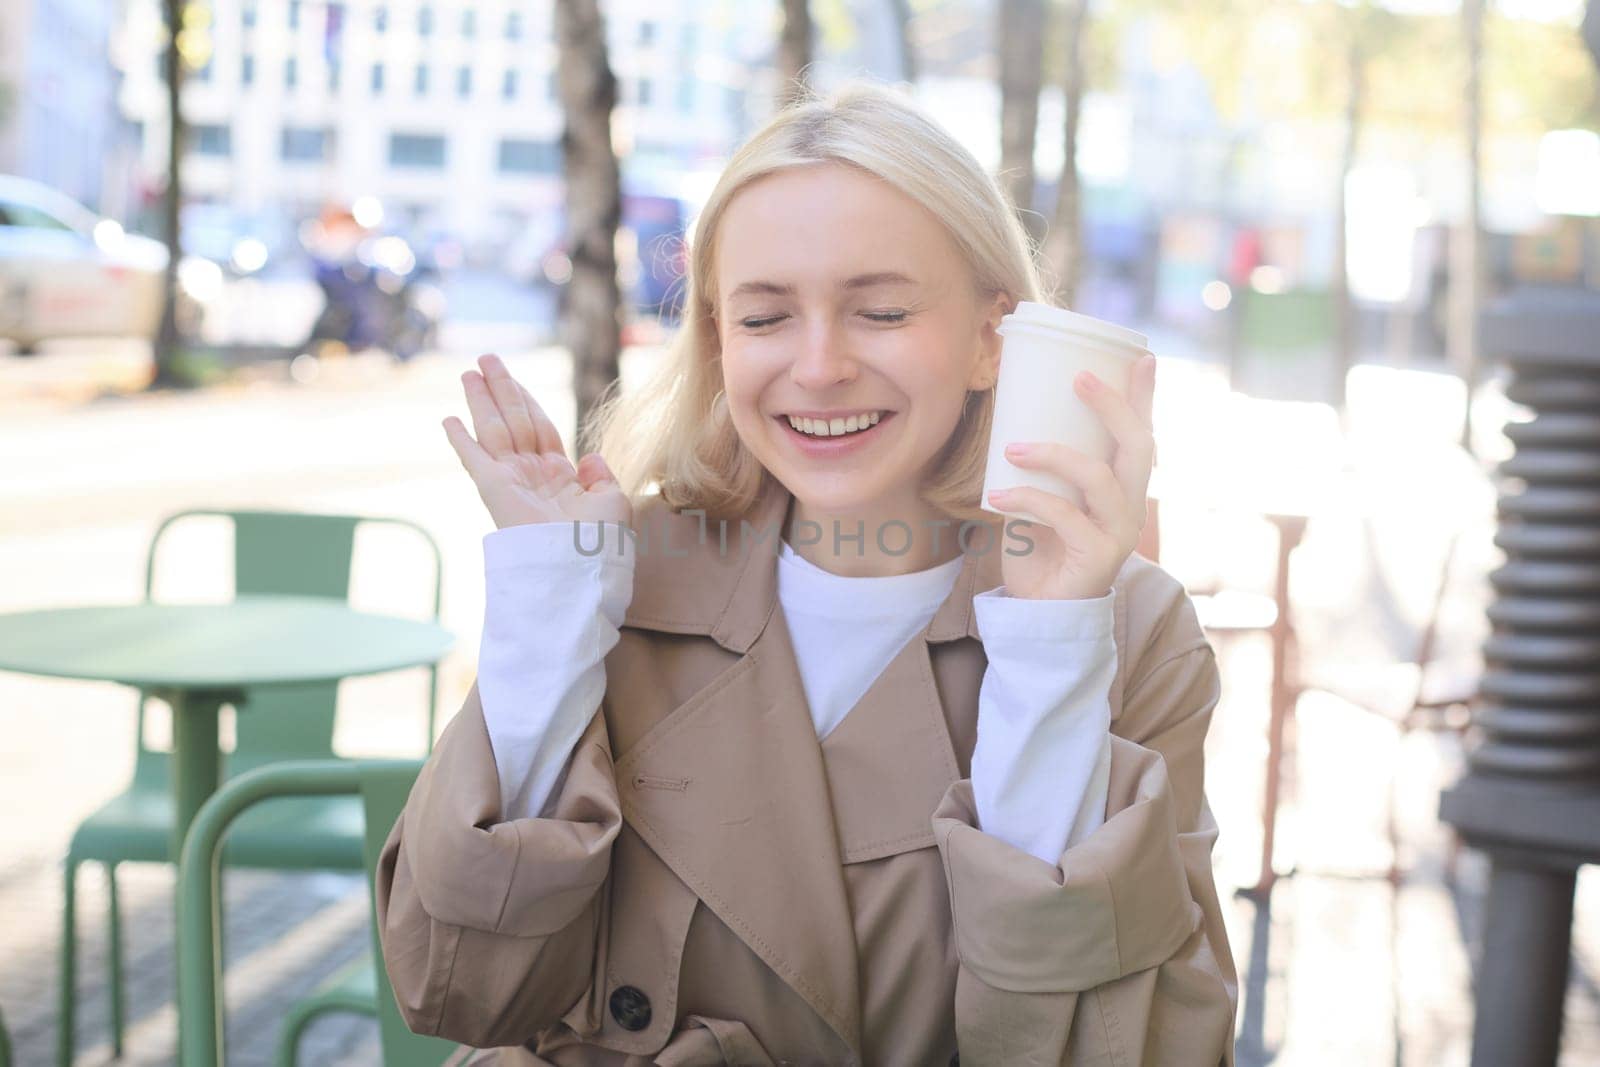 Portrait of cheerful young blond woman, enjoying spending time in outdoor cafe, drinking coffee and laughing, having casual meet up in street restaurant. Lifestyle concept